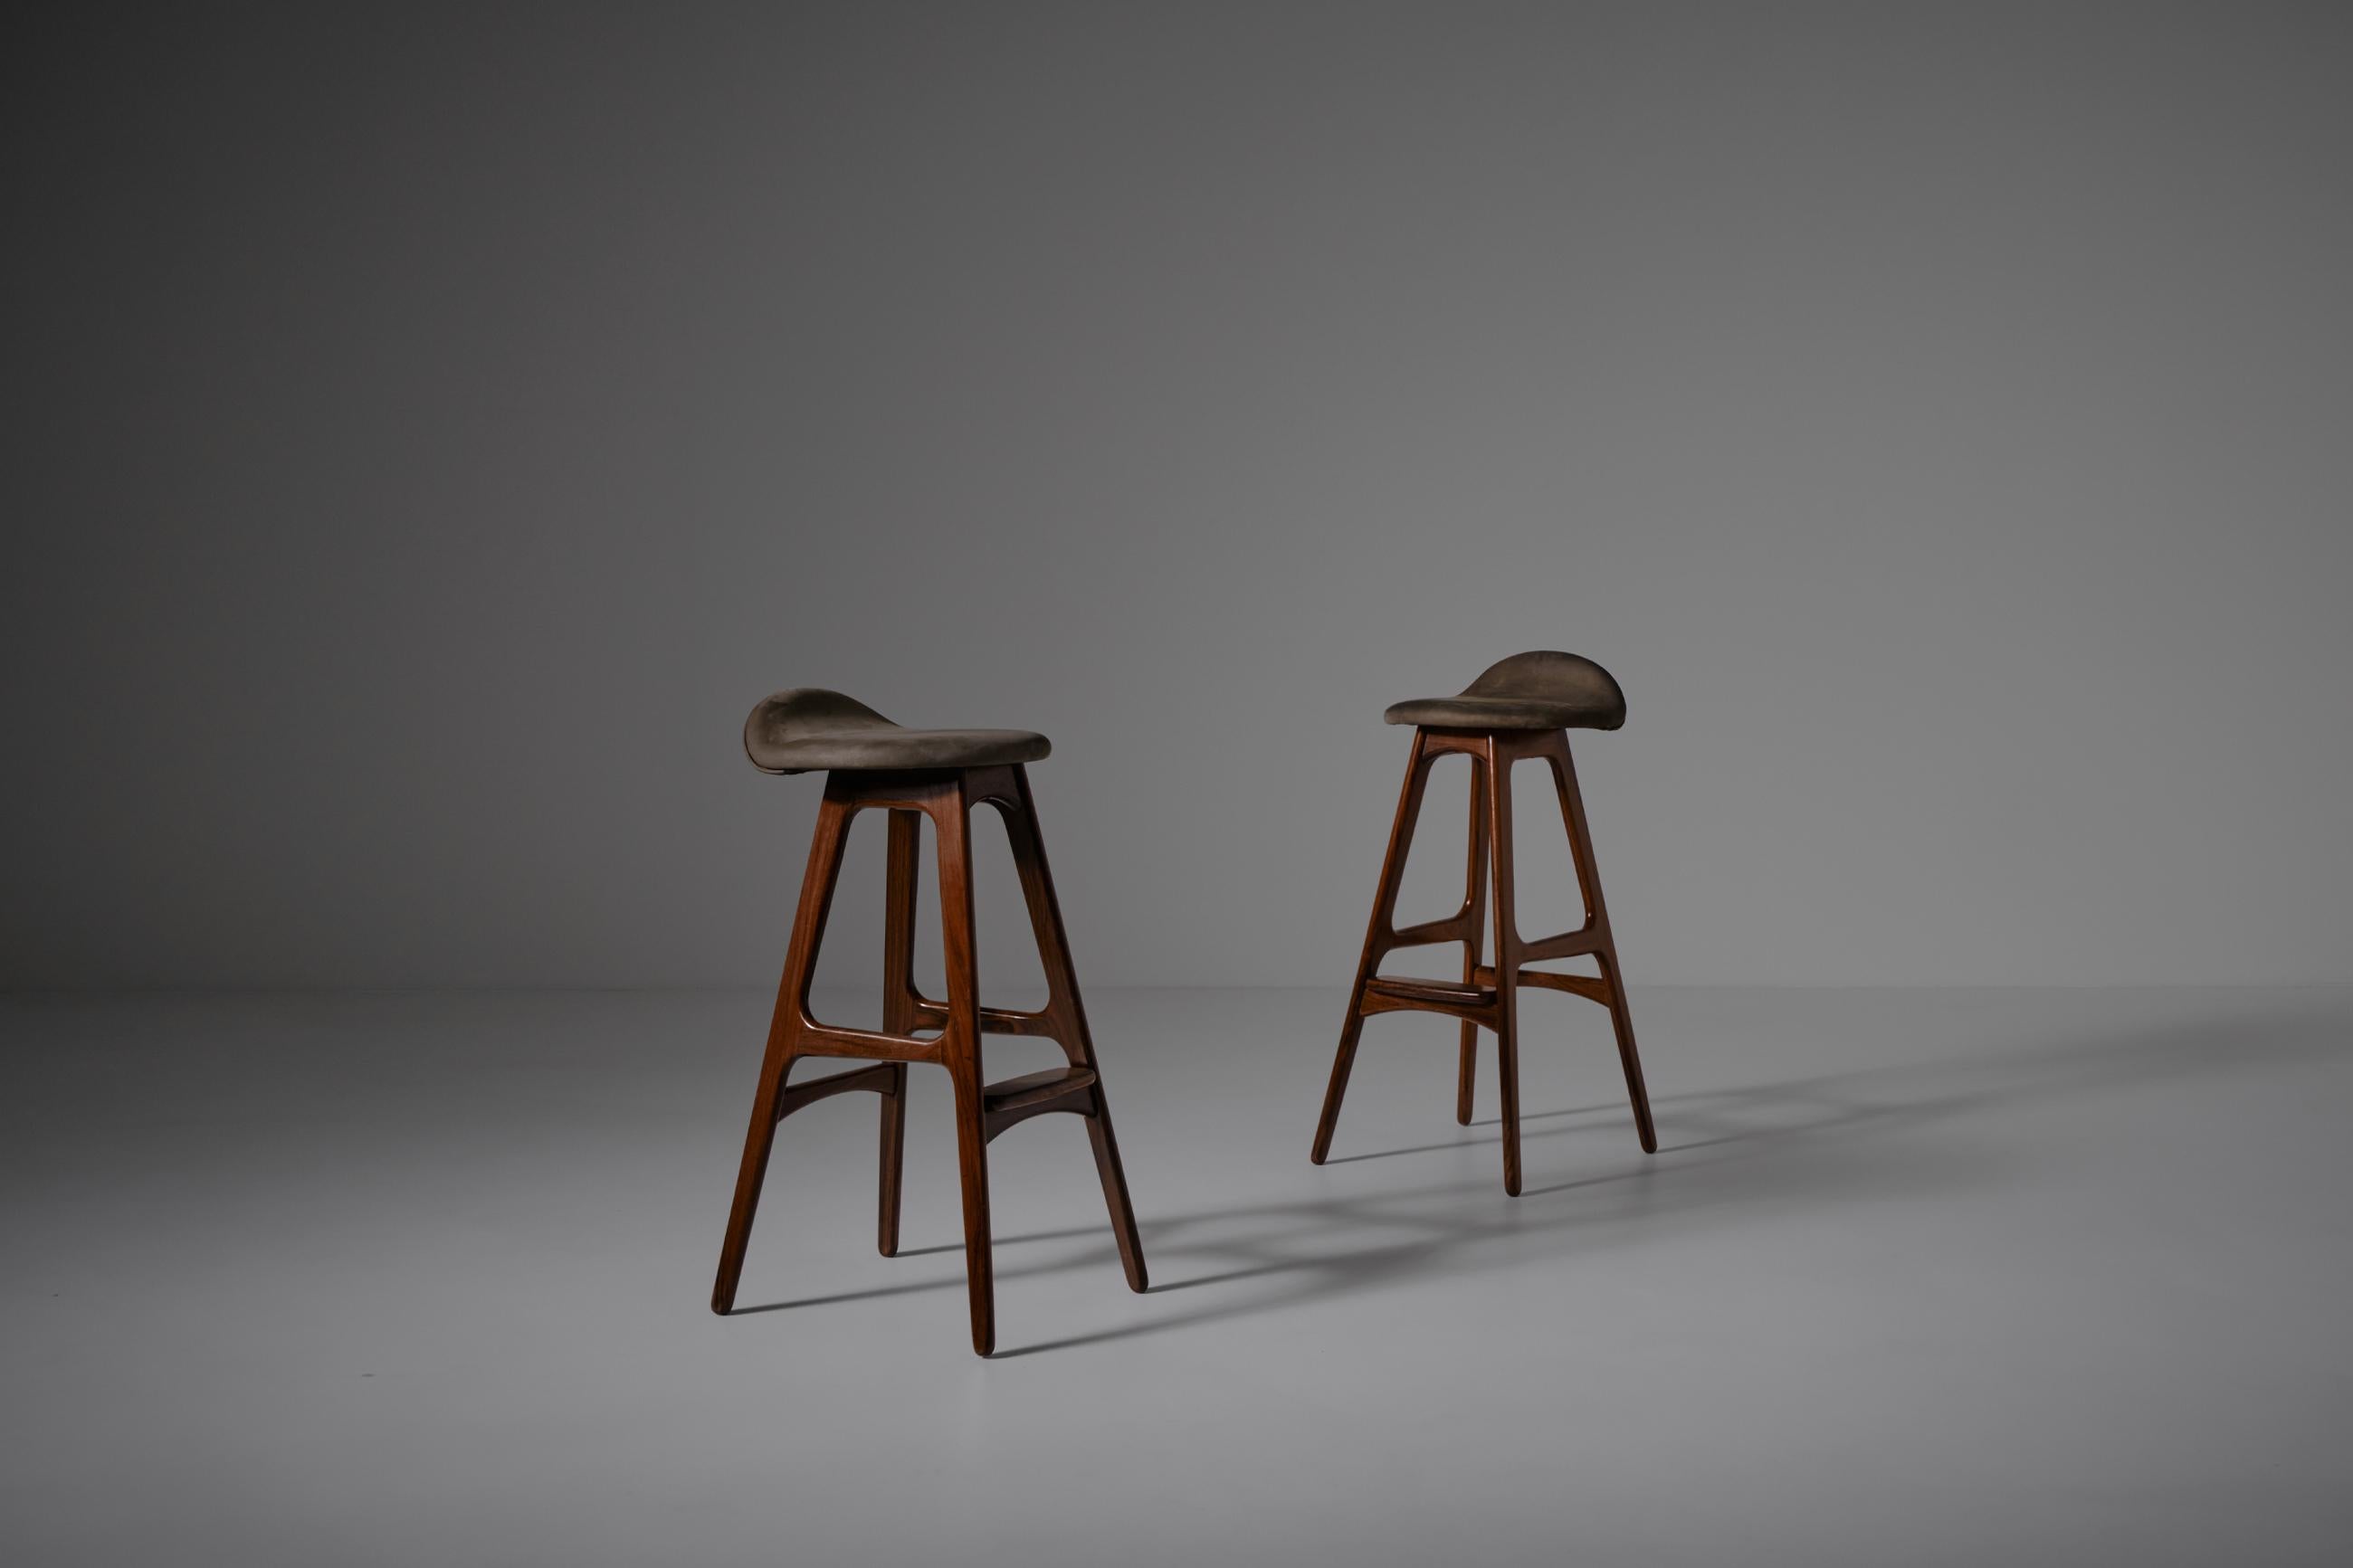 Beautiful set of of OD-61 bar stools by Erik Buch for Oddense Møbelfabrik, Denmark 1964. Beautiful sculptural and organic design, a classic design which matches very good in a modern interior. These stools are made in solid Rosewood with a beautiful